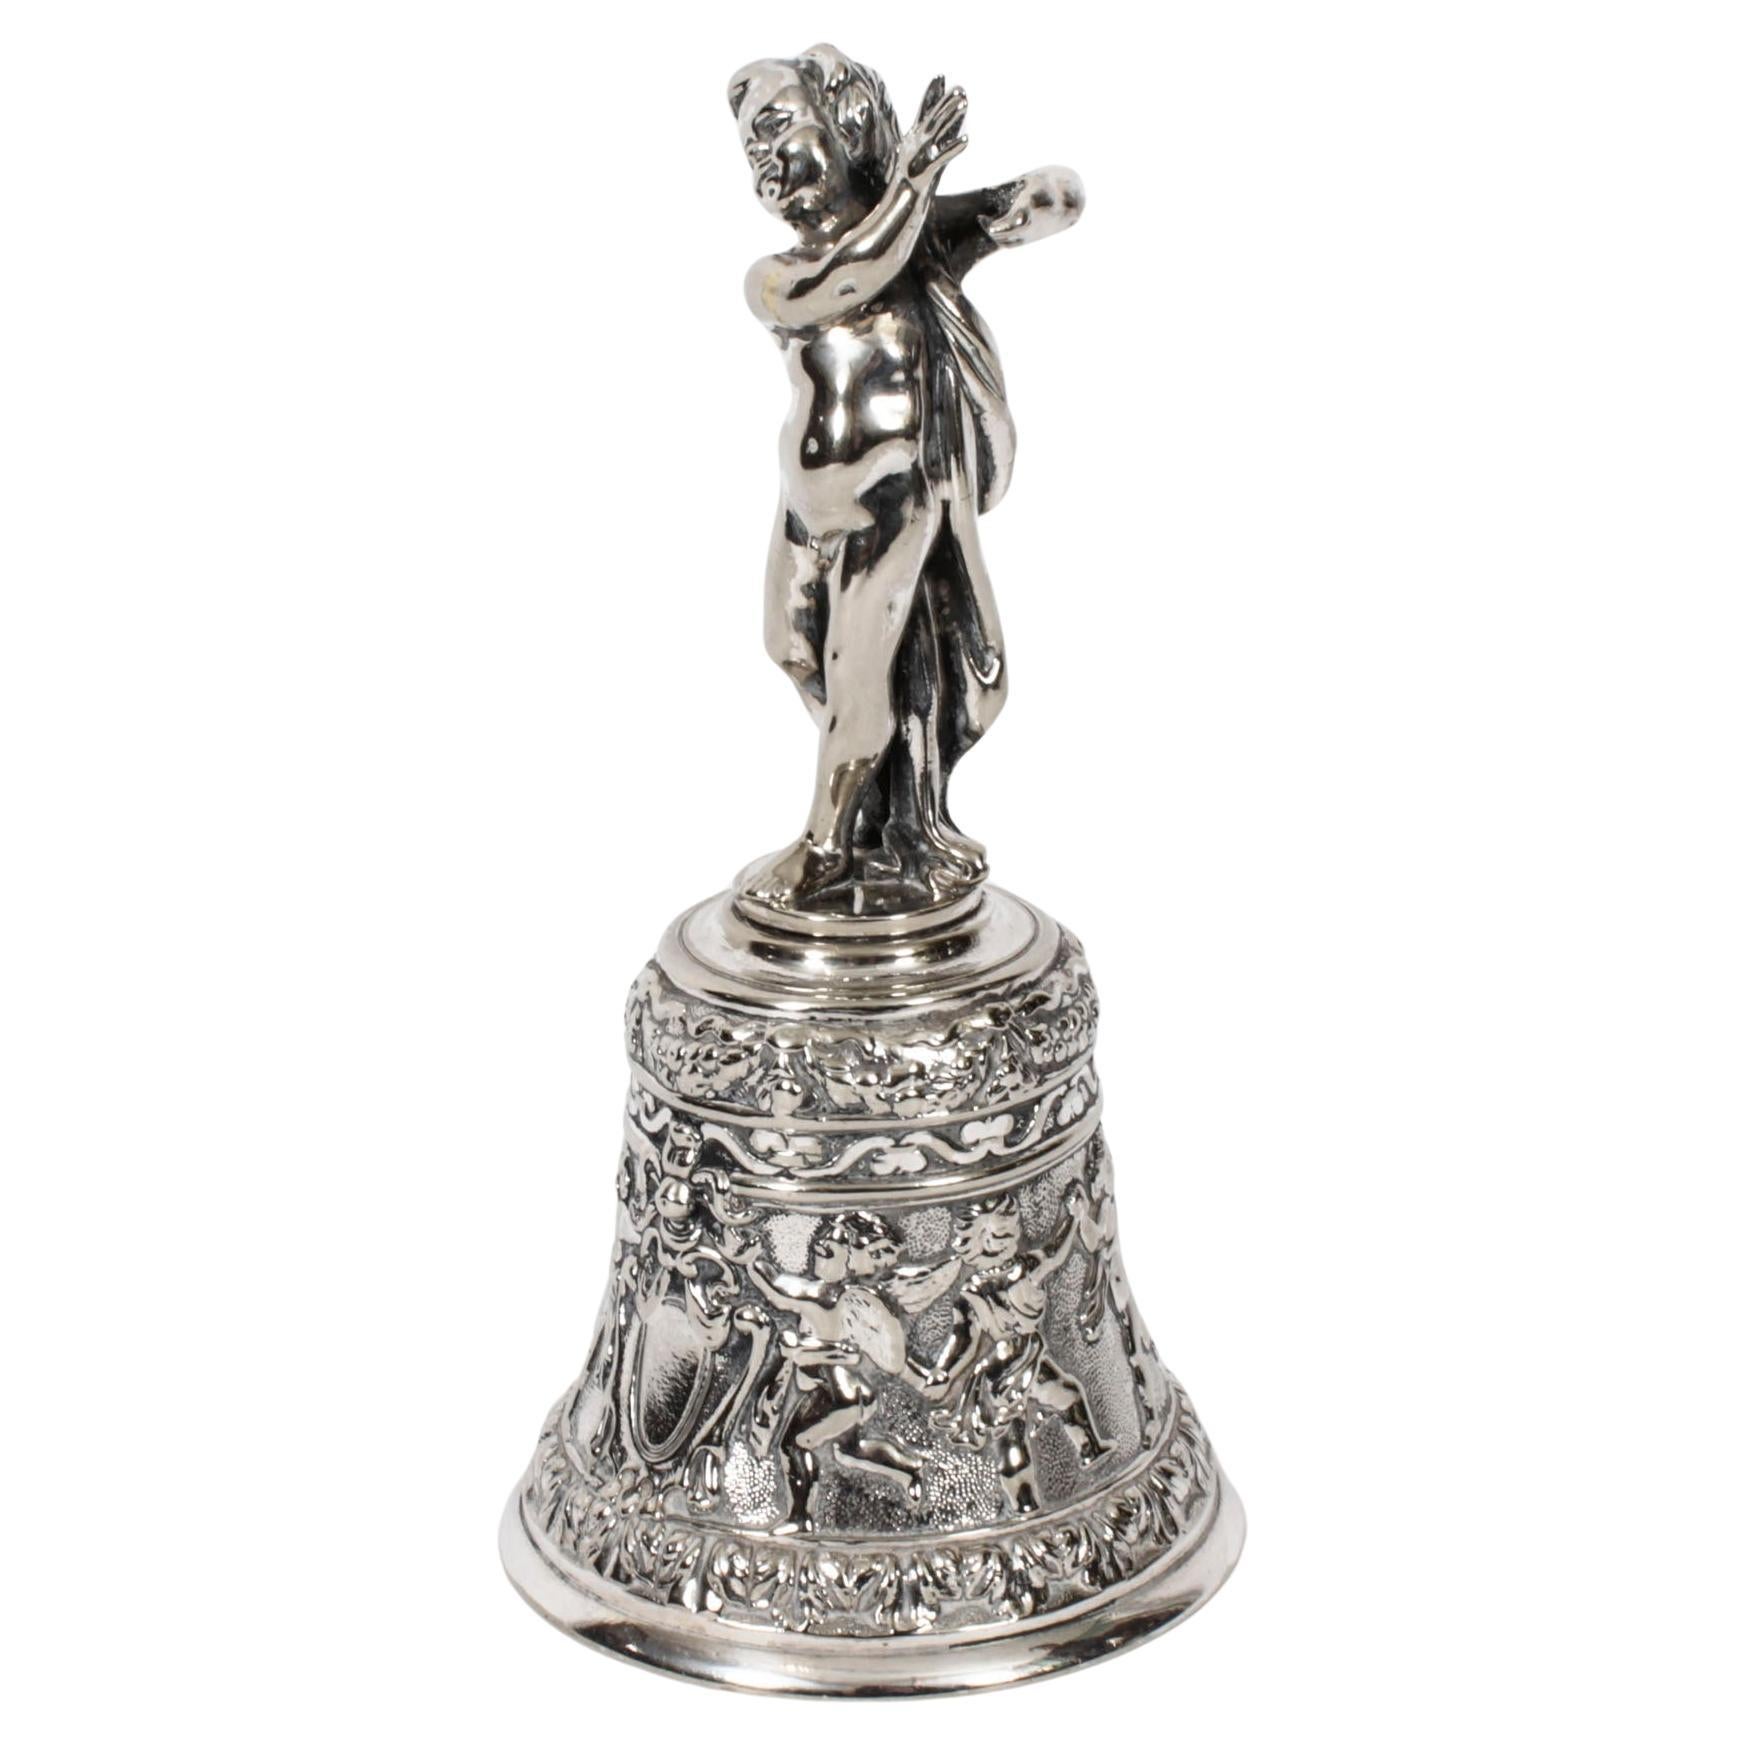 Antique Silver Plated Hand Bell Renaissance Revival 19th Century For Sale